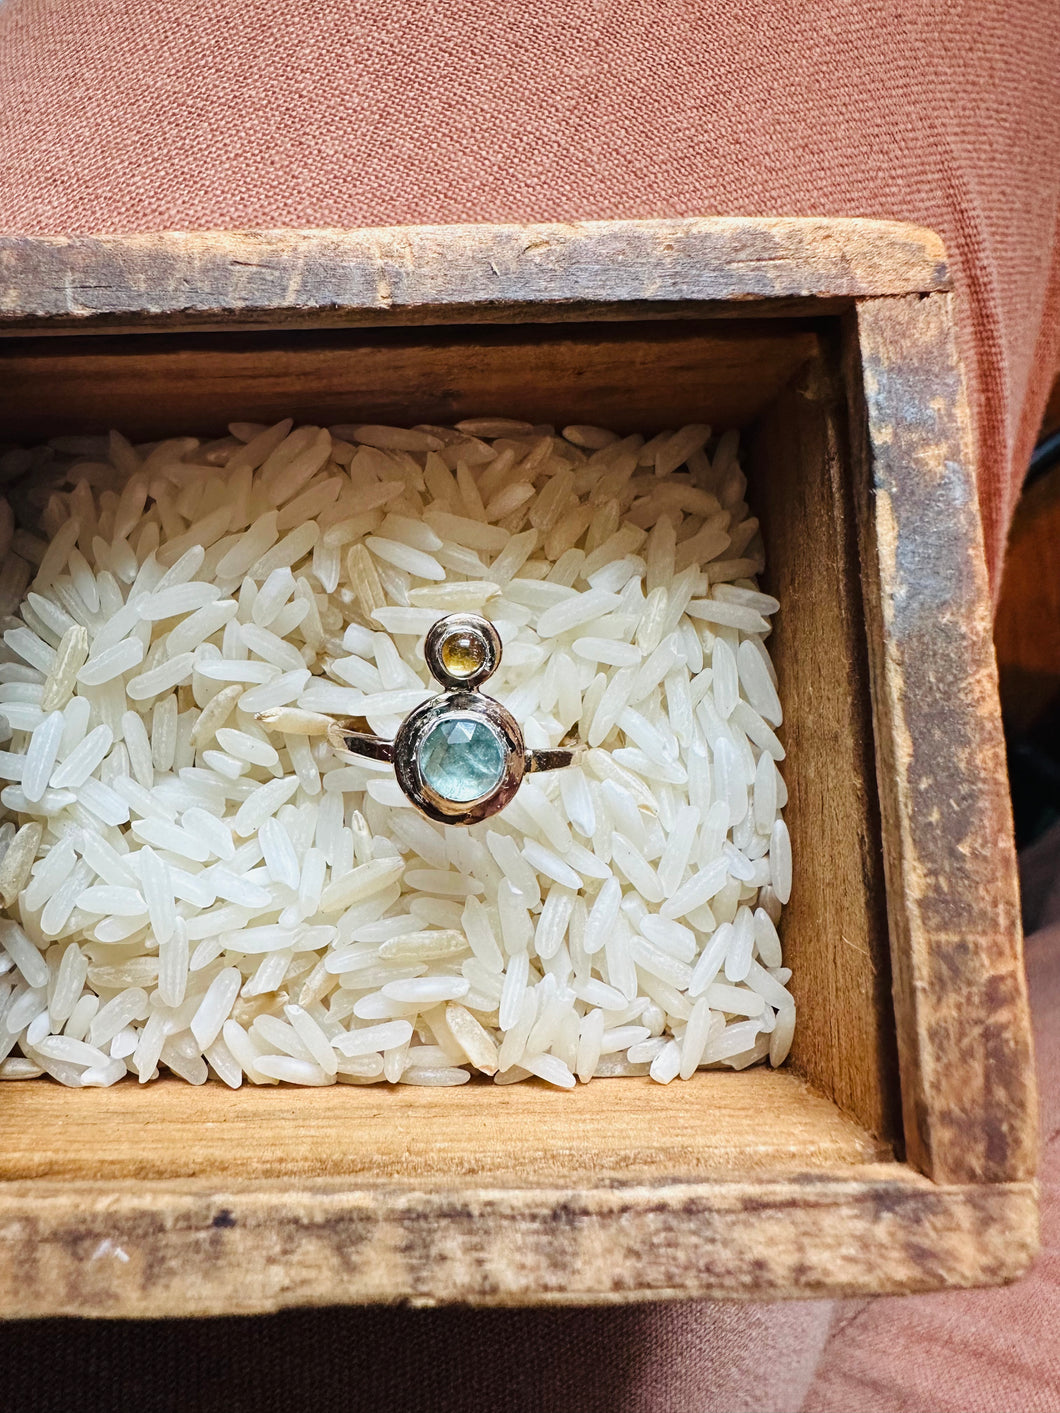 One of a King Ring Handcrafted in 14k Gold Fill and Fine Silver, with Rose Cut Kyanite and Citrine, sitting in a rice filled vintage wooden box